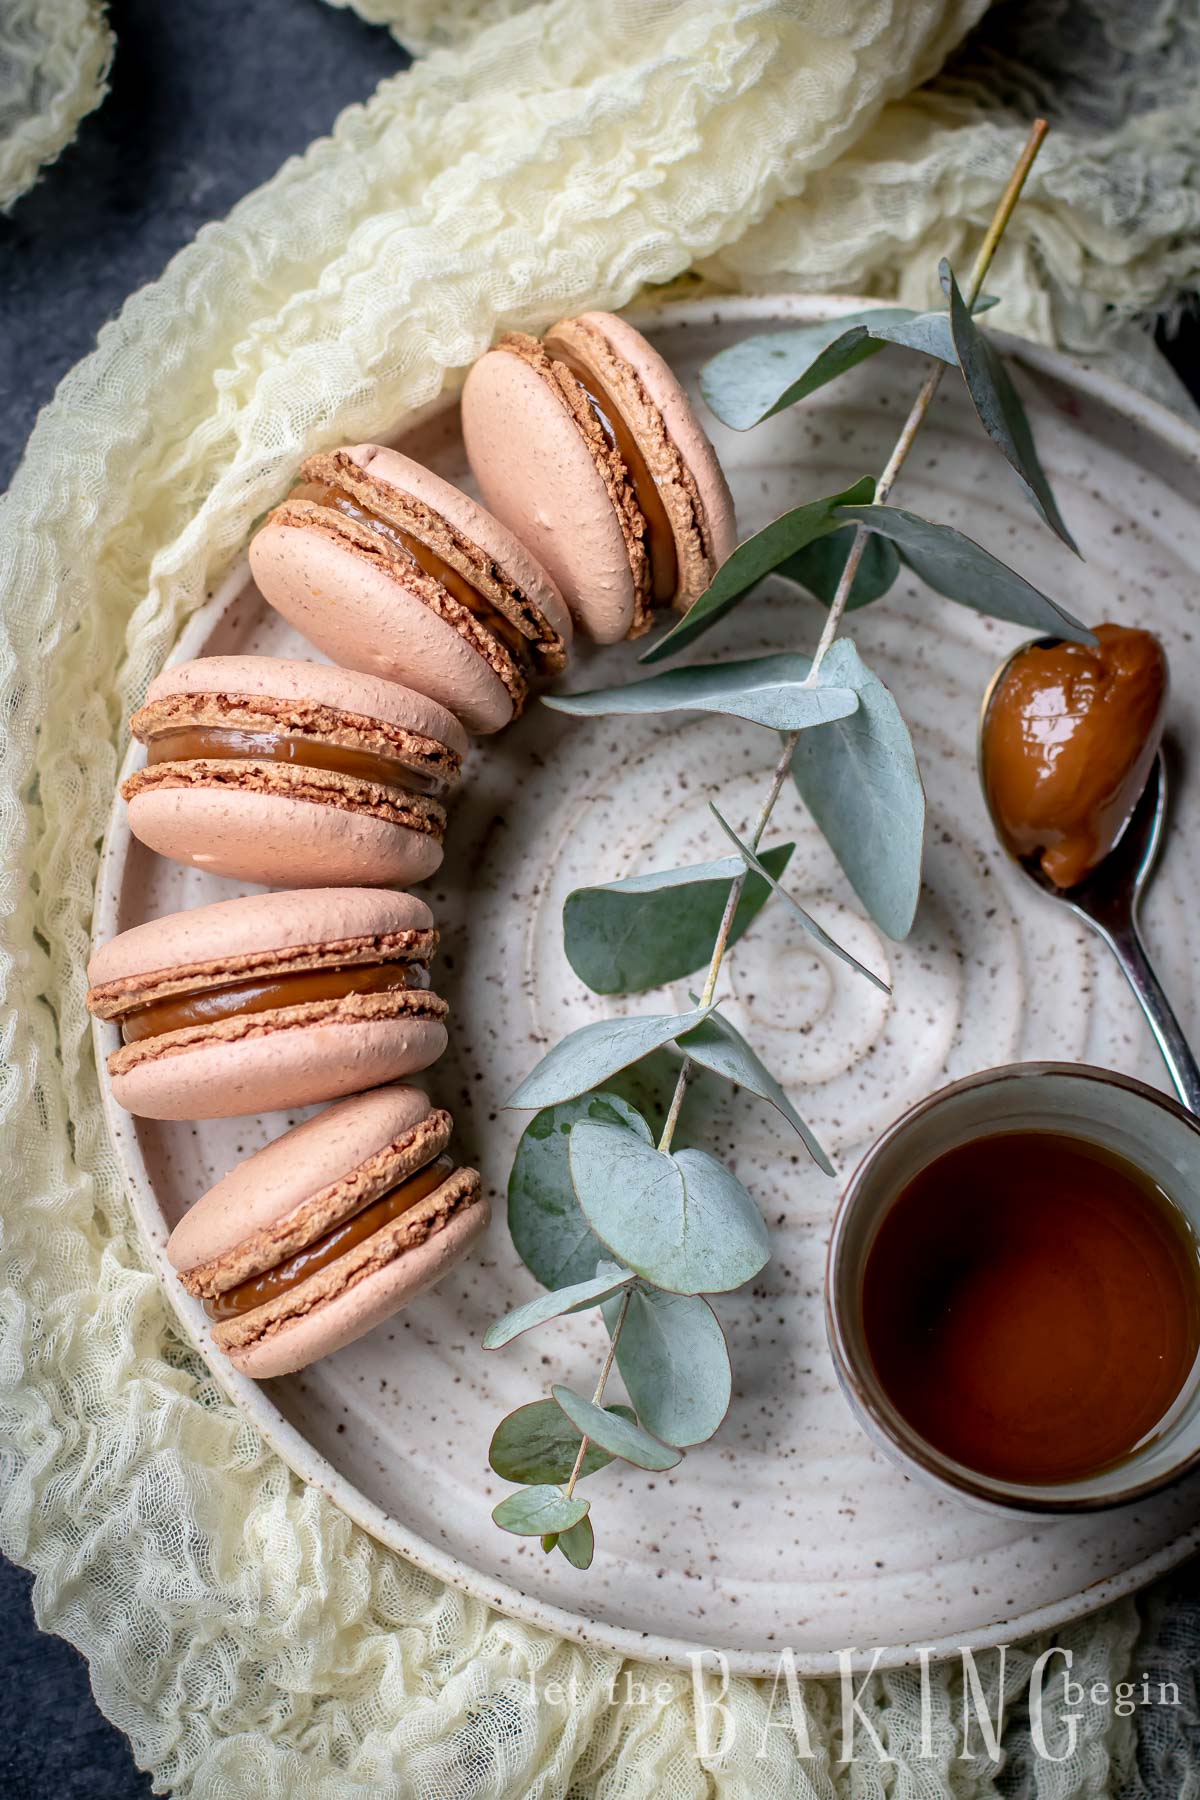 Dulce de Leche Macaron Recipe uses Italian Macaron Shell recipe and dulce de leche as the filling. Using dulce de leche as the macaron filling is the most genius thing, since it's easy and of course - super delicious.